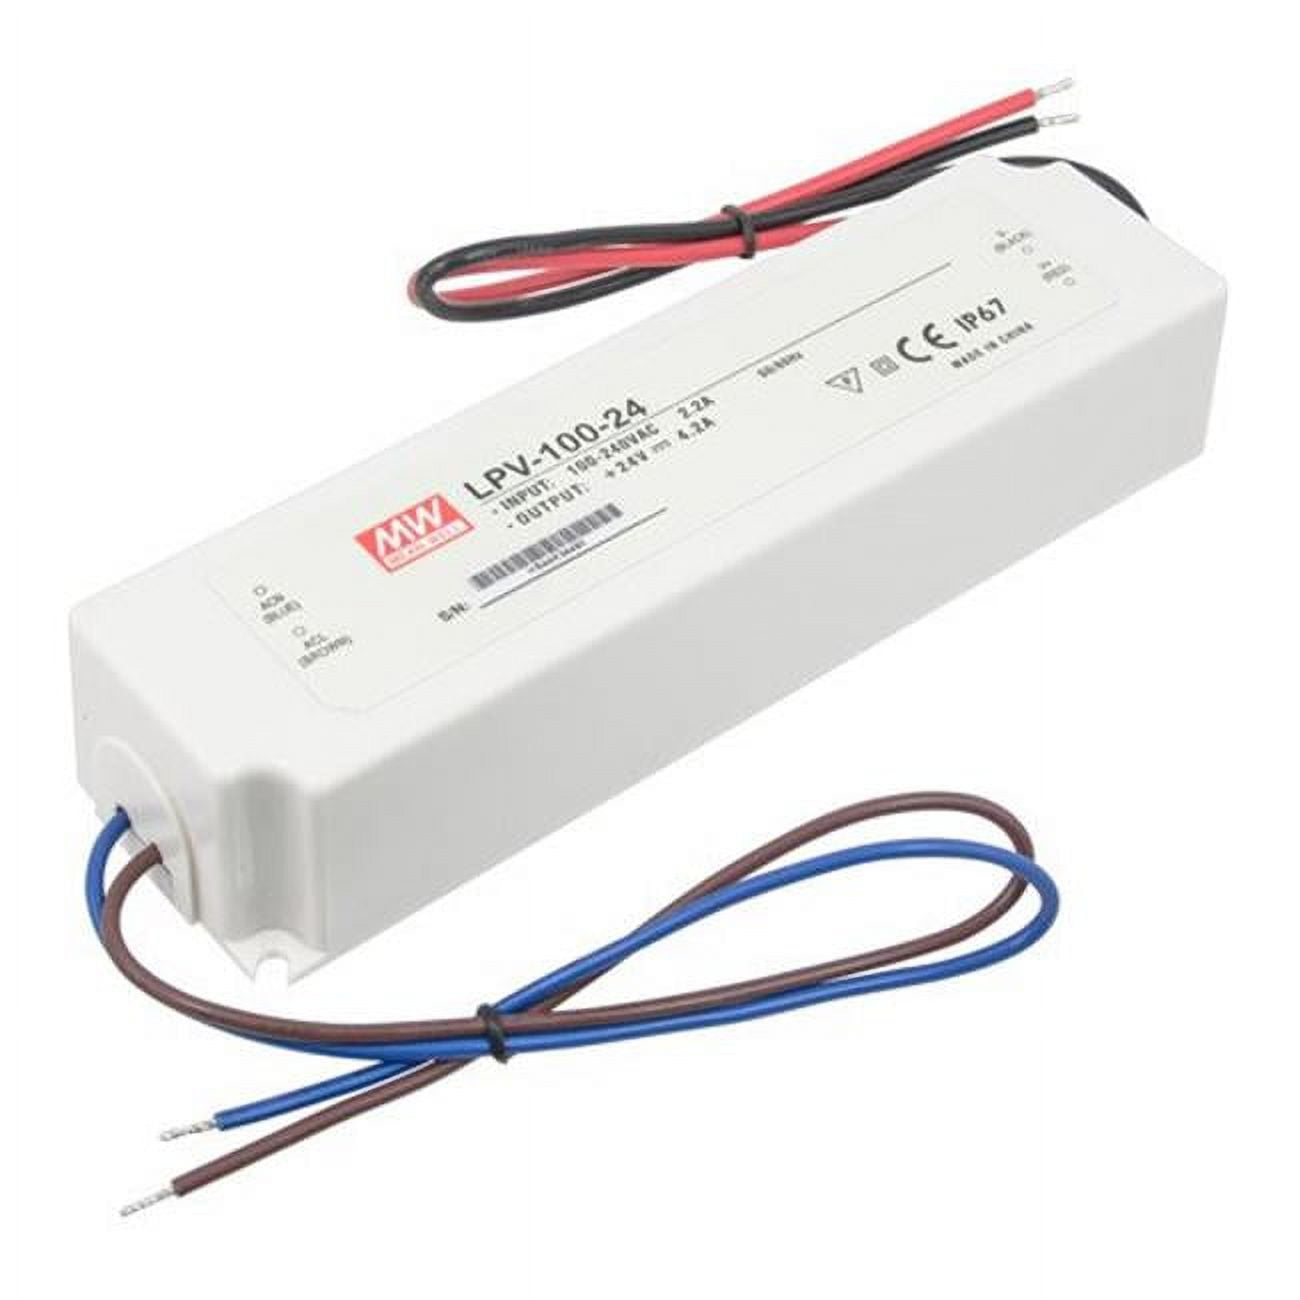 Ccv-dr150-24 150w 24v Dimmable Driver